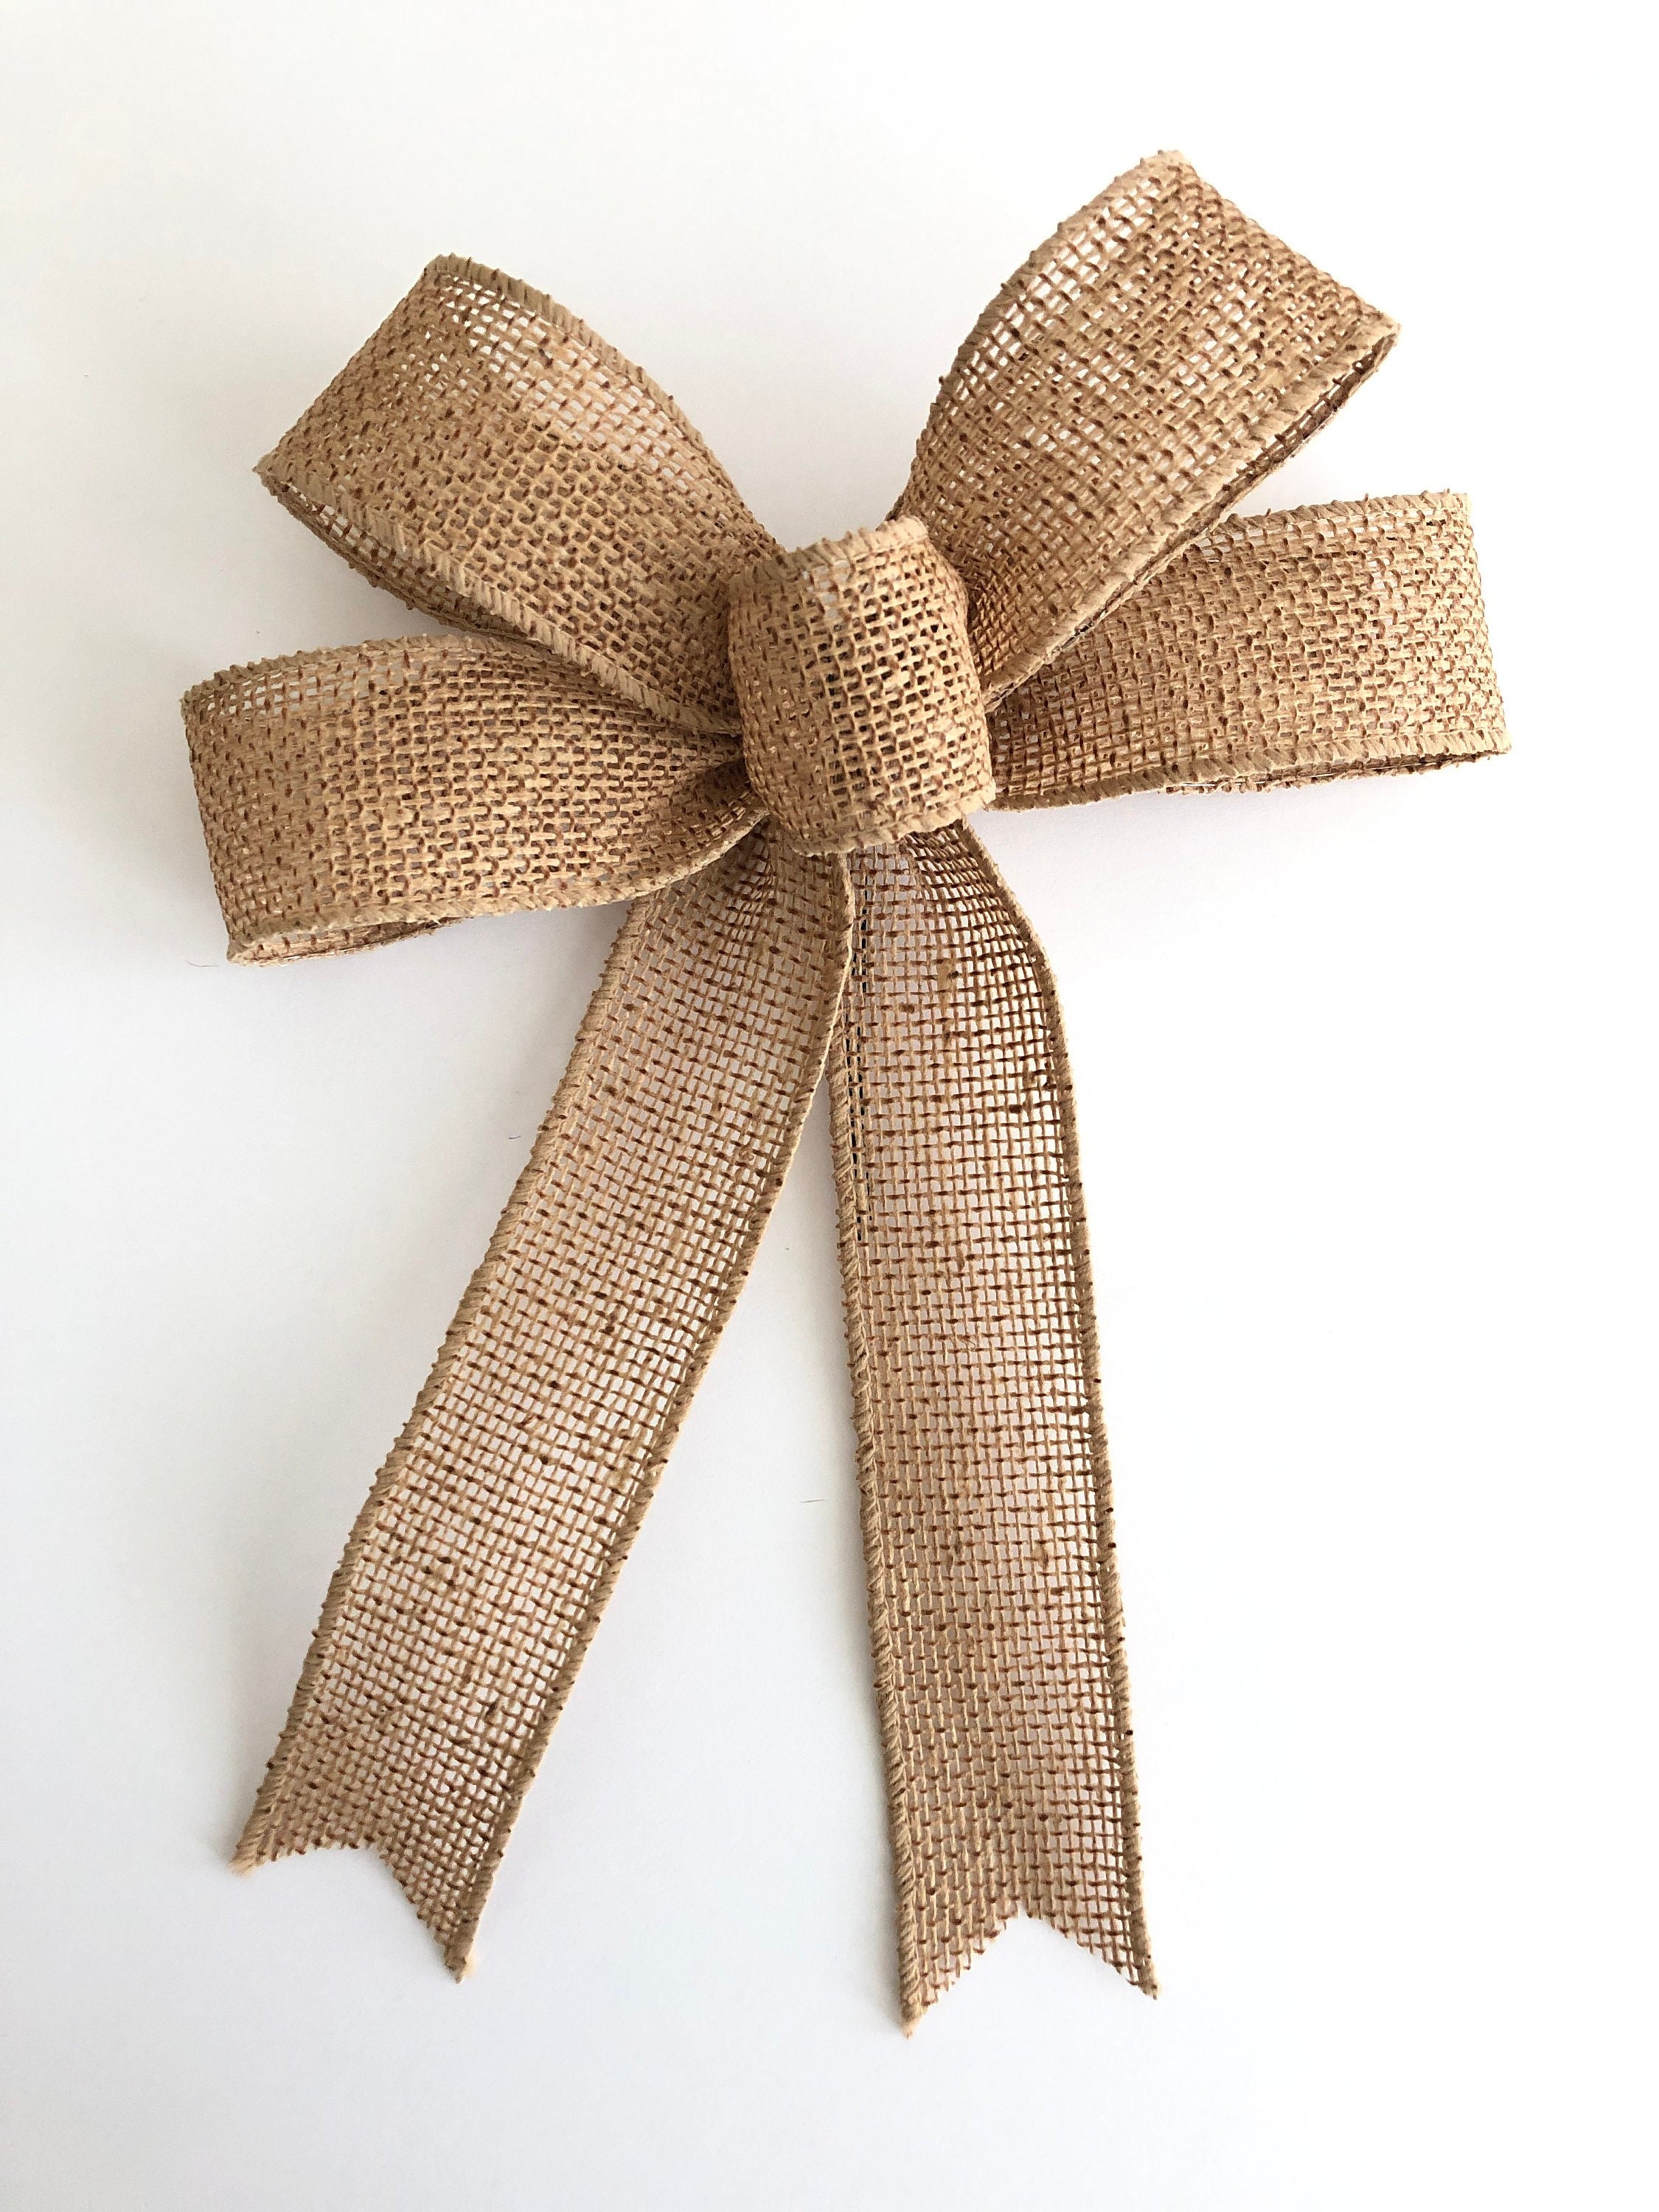 How to make burlap bows 